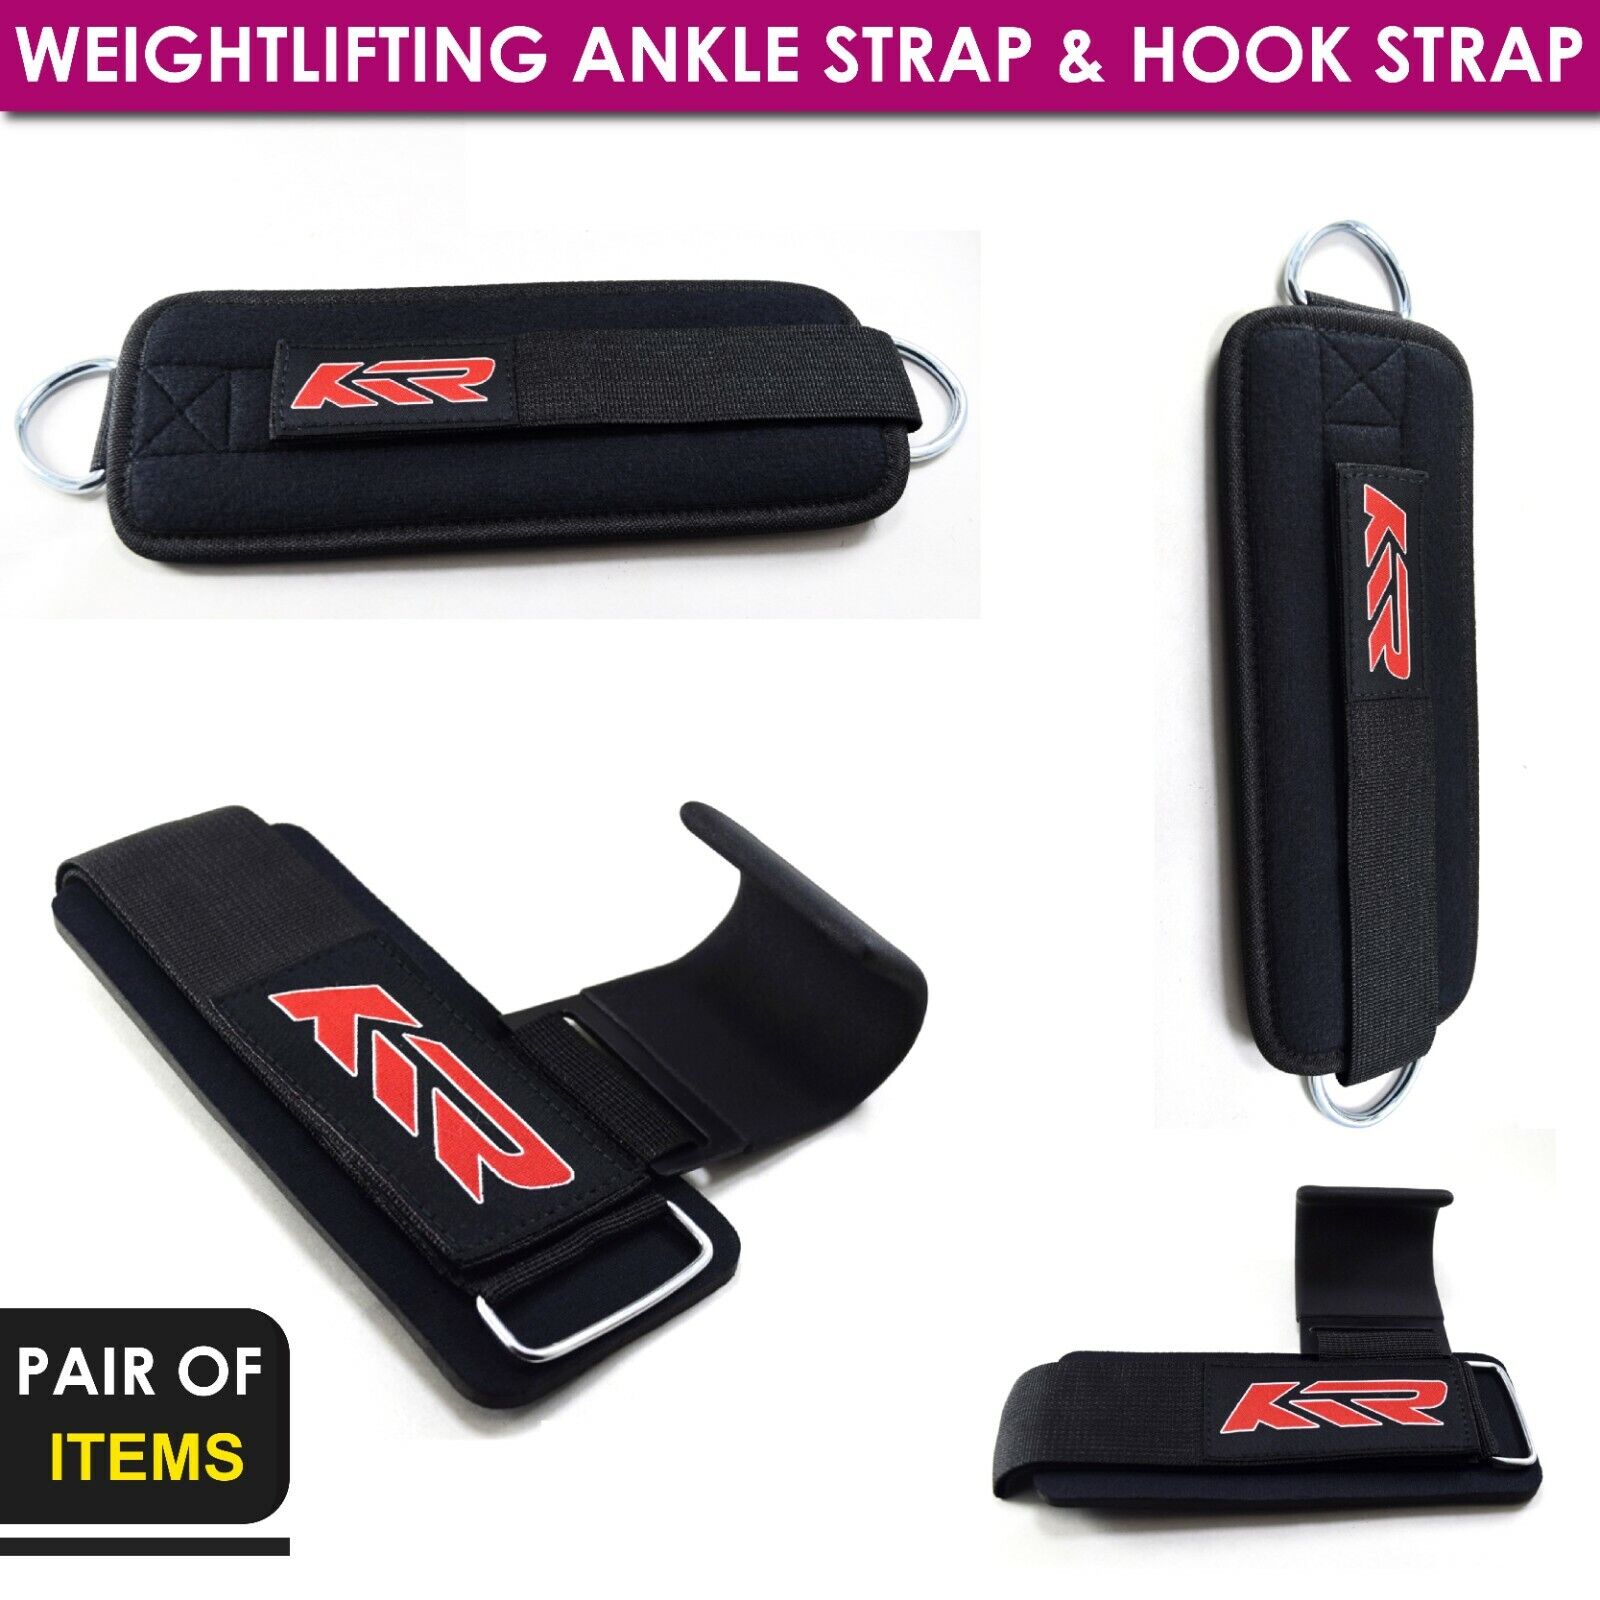 PAIR OF OFFicial store WEIGHTLIFTING ANKLE D-RING STRAP GYM & Fees free HOOK FI FOR